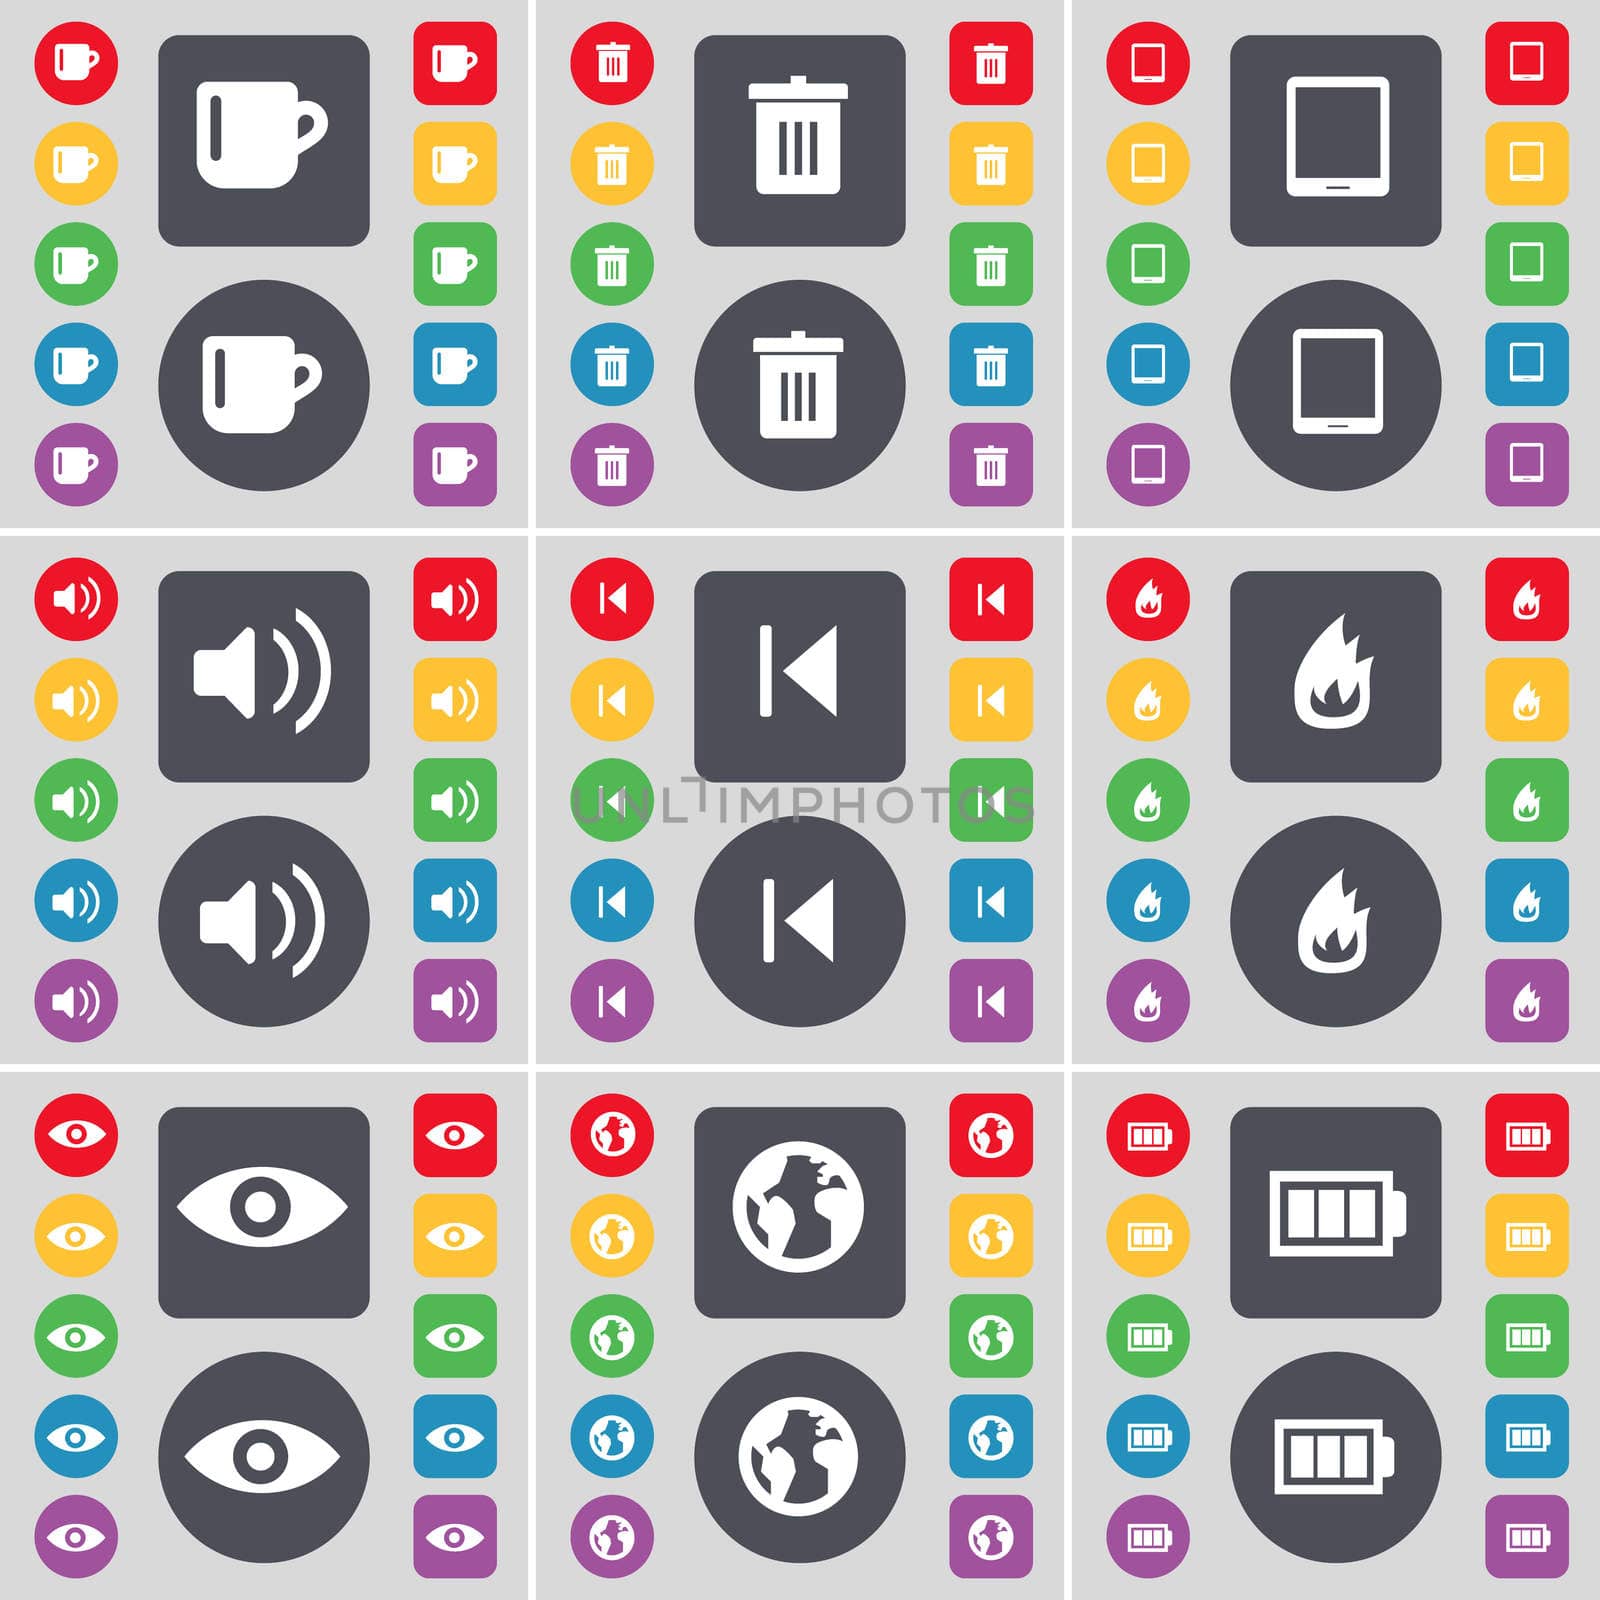 Cup, Trash can, Tablet PC, Sound, Media skip, Fire, Vision, Earth, Battery icon symbol. A large set of flat, colored buttons for your design. illustration